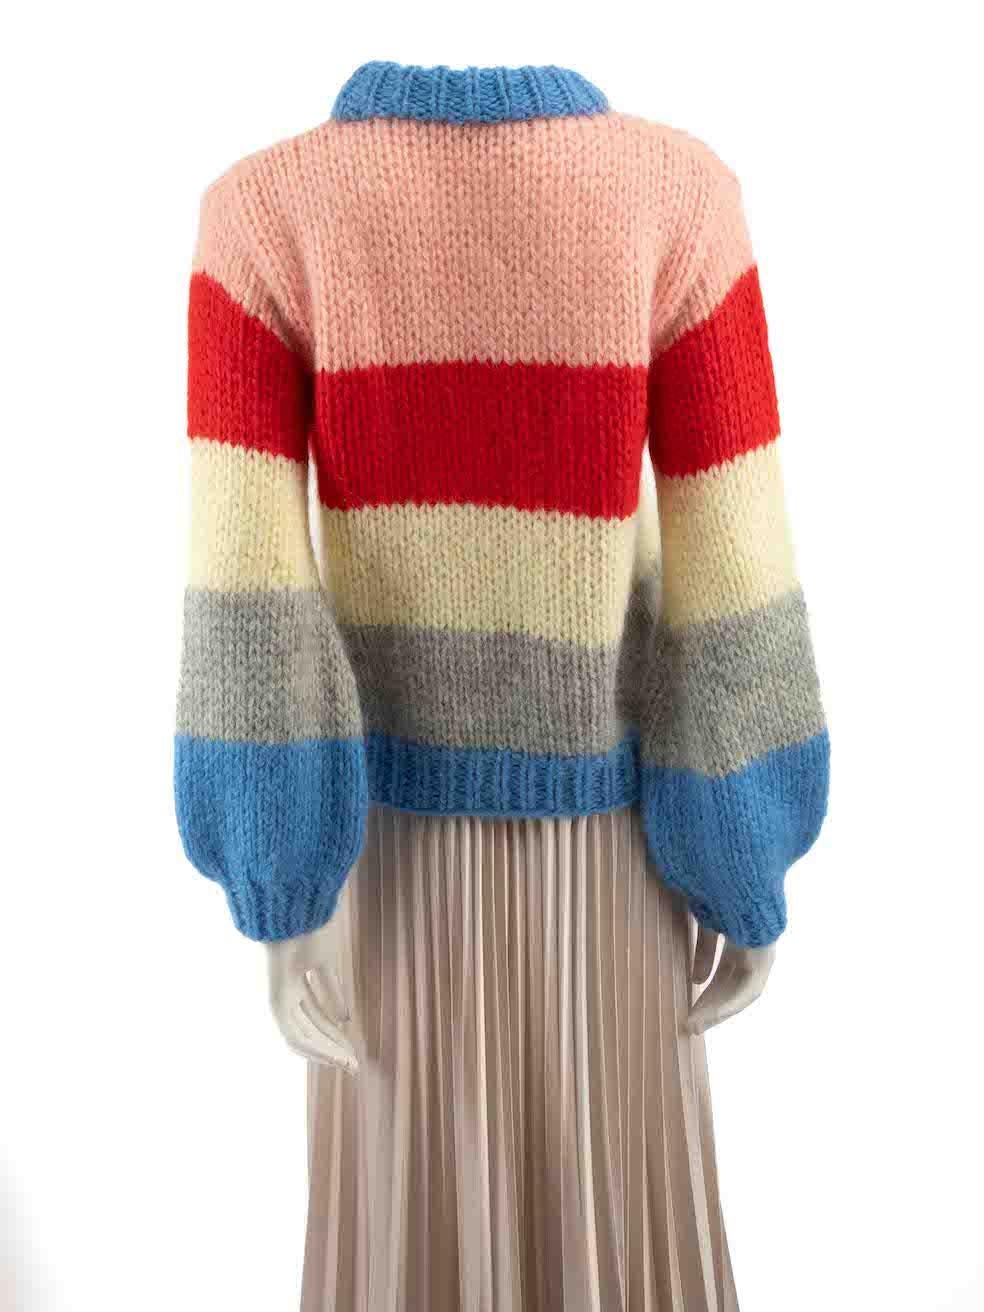 Ganni Striped Wool Chunky Knit Jumper Size S In Good Condition For Sale In London, GB